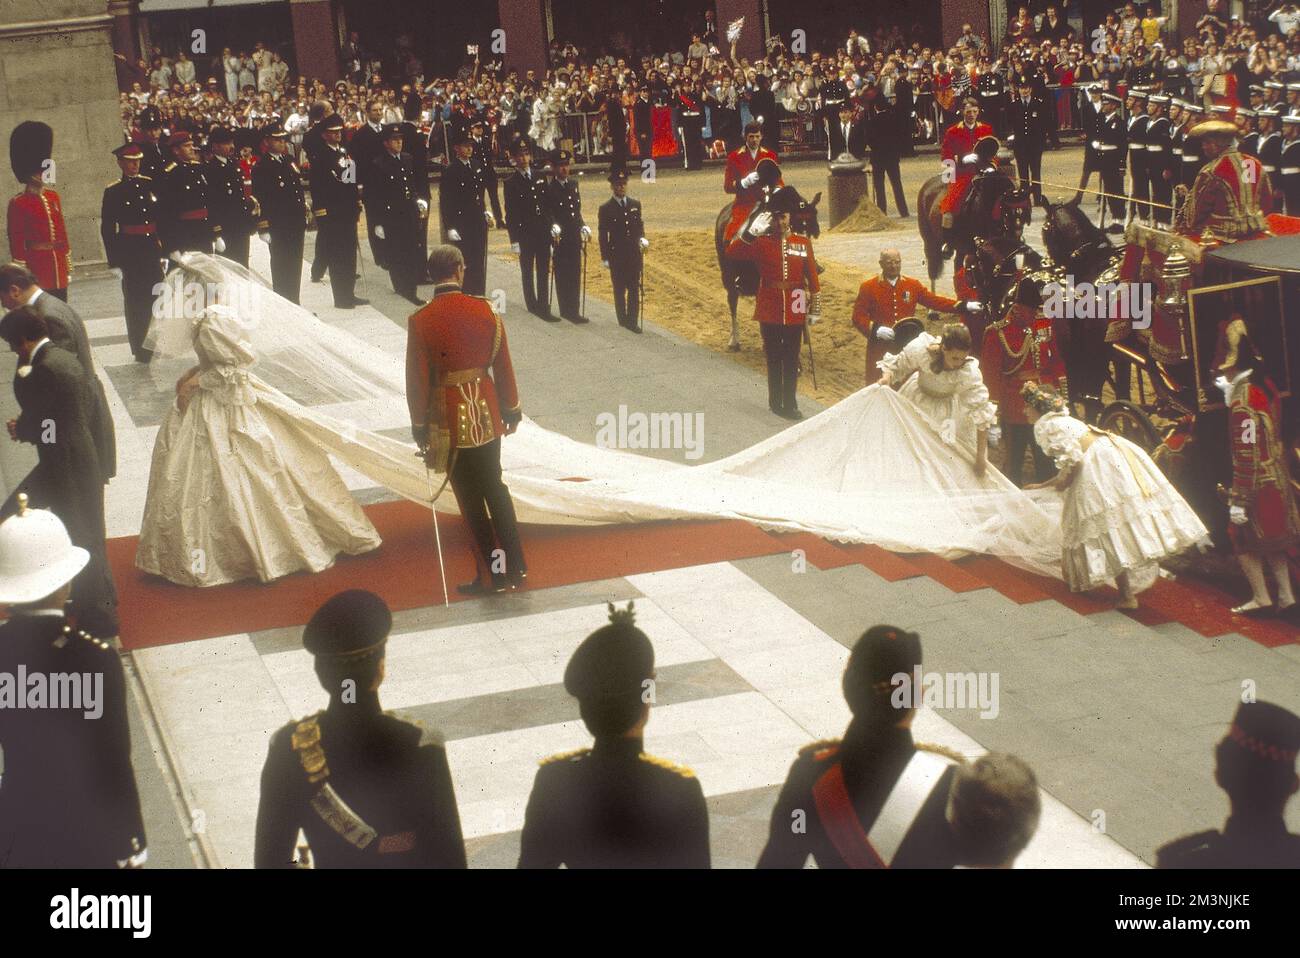 Lady Diana Spencer arrives at St Paul's Cathedral for her marriage to Prince Charles on 29 July 1981.  As she proceeds up the red carpeted steps, her bridesmaids arrange the train of her taffeta, designed by David and Elizabeth Emanuel.     Date: 1981 Stock Photo